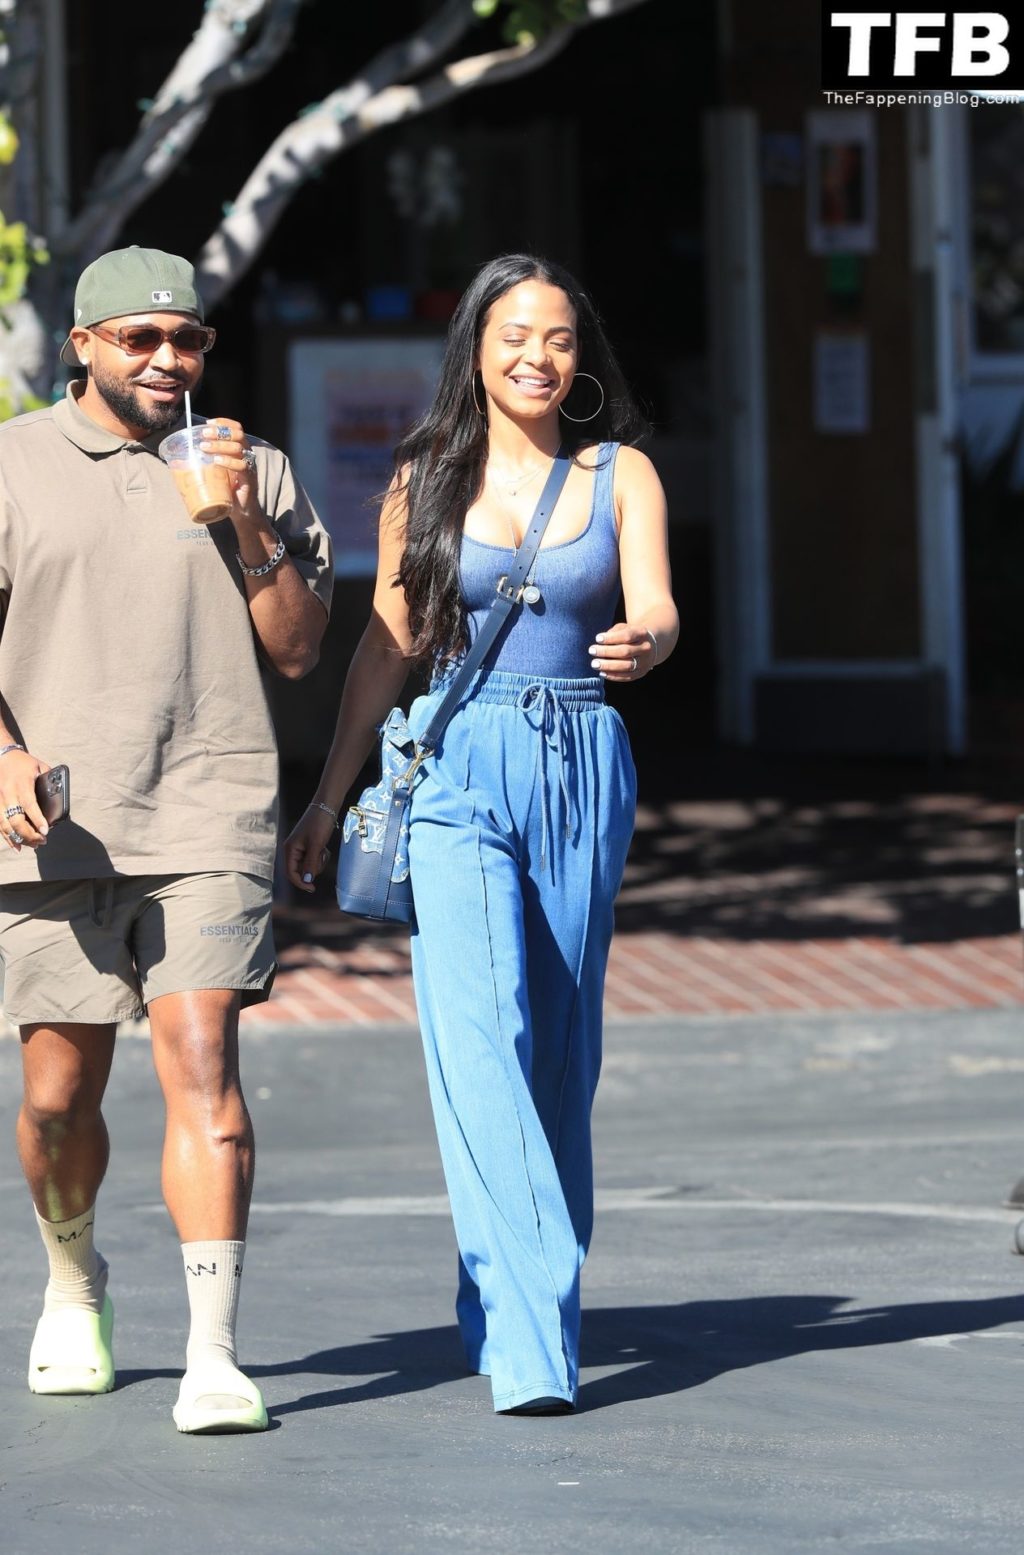 Christina Milian Sexy The Fappening Blog 22 1024x1555 - Christina Milian Glows in All Denim with BFF J Ryan La Cour (24 Photos)